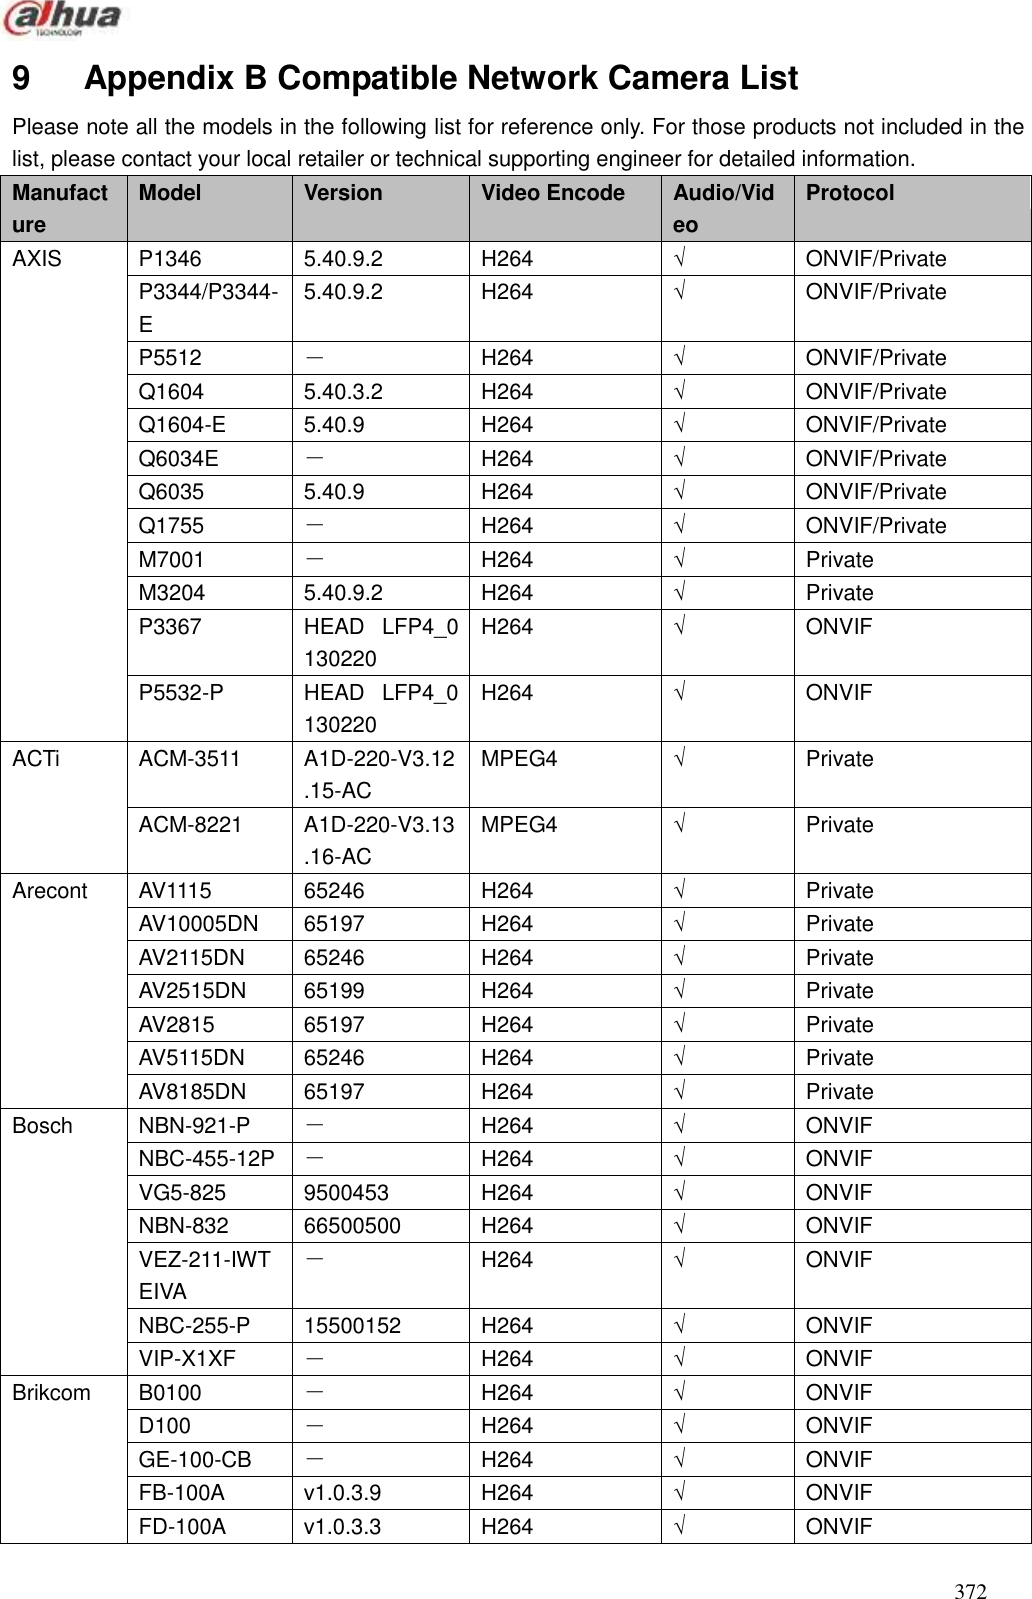  372  9    Appendix B Compatible Network Camera List Please note all the models in the following list for reference only. For those products not included in the list, please contact your local retailer or technical supporting engineer for detailed information.   Manufacture Model Version Video Encode   Audio/Video   Protocol   AXIS P1346 5.40.9.2 H264 √ ONVIF/Private P3344/P3344-E 5.40.9.2 H264 √ ONVIF/Private P5512 － H264 √ ONVIF/Private Q1604 5.40.3.2 H264 √ ONVIF/Private Q1604-E 5.40.9 H264 √ ONVIF/Private Q6034E － H264 √ ONVIF/Private Q6035 5.40.9  H264 √ ONVIF/Private Q1755 － H264 √ ONVIF/Private M7001 － H264 √ Private M3204 5.40.9.2  H264 √ Private P3367 HEAD  LFP4_0 130220 H264 √ ONVIF P5532-P HEAD  LFP4_0 130220 H264 √ ONVIF ACTi ACM-3511 A1D-220-V3.12.15-AC MPEG4 √ Private ACM-8221 A1D-220-V3.13.16-AC MPEG4 √ Private Arecont AV1115 65246 H264 √ Private AV10005DN 65197 H264 √ Private AV2115DN 65246 H264 √ Private AV2515DN 65199 H264 √ Private AV2815 65197 H264 √ Private AV5115DN 65246 H264 √ Private AV8185DN 65197 H264 √ Private Bosch NBN-921-P － H264 √ ONVIF NBC-455-12P － H264 √ ONVIF VG5-825 9500453 H264 √ ONVIF NBN-832 66500500 H264 √ ONVIF VEZ-211-IWTEIVA － H264 √ ONVIF NBC-255-P 15500152 H264 √ ONVIF VIP-X1XF － H264 √ ONVIF Brikcom B0100 － H264 √ ONVIF D100 － H264 √ ONVIF GE-100-CB － H264 √ ONVIF FB-100A v1.0.3.9 H264 √ ONVIF FD-100A v1.0.3.3 H264 √ ONVIF 